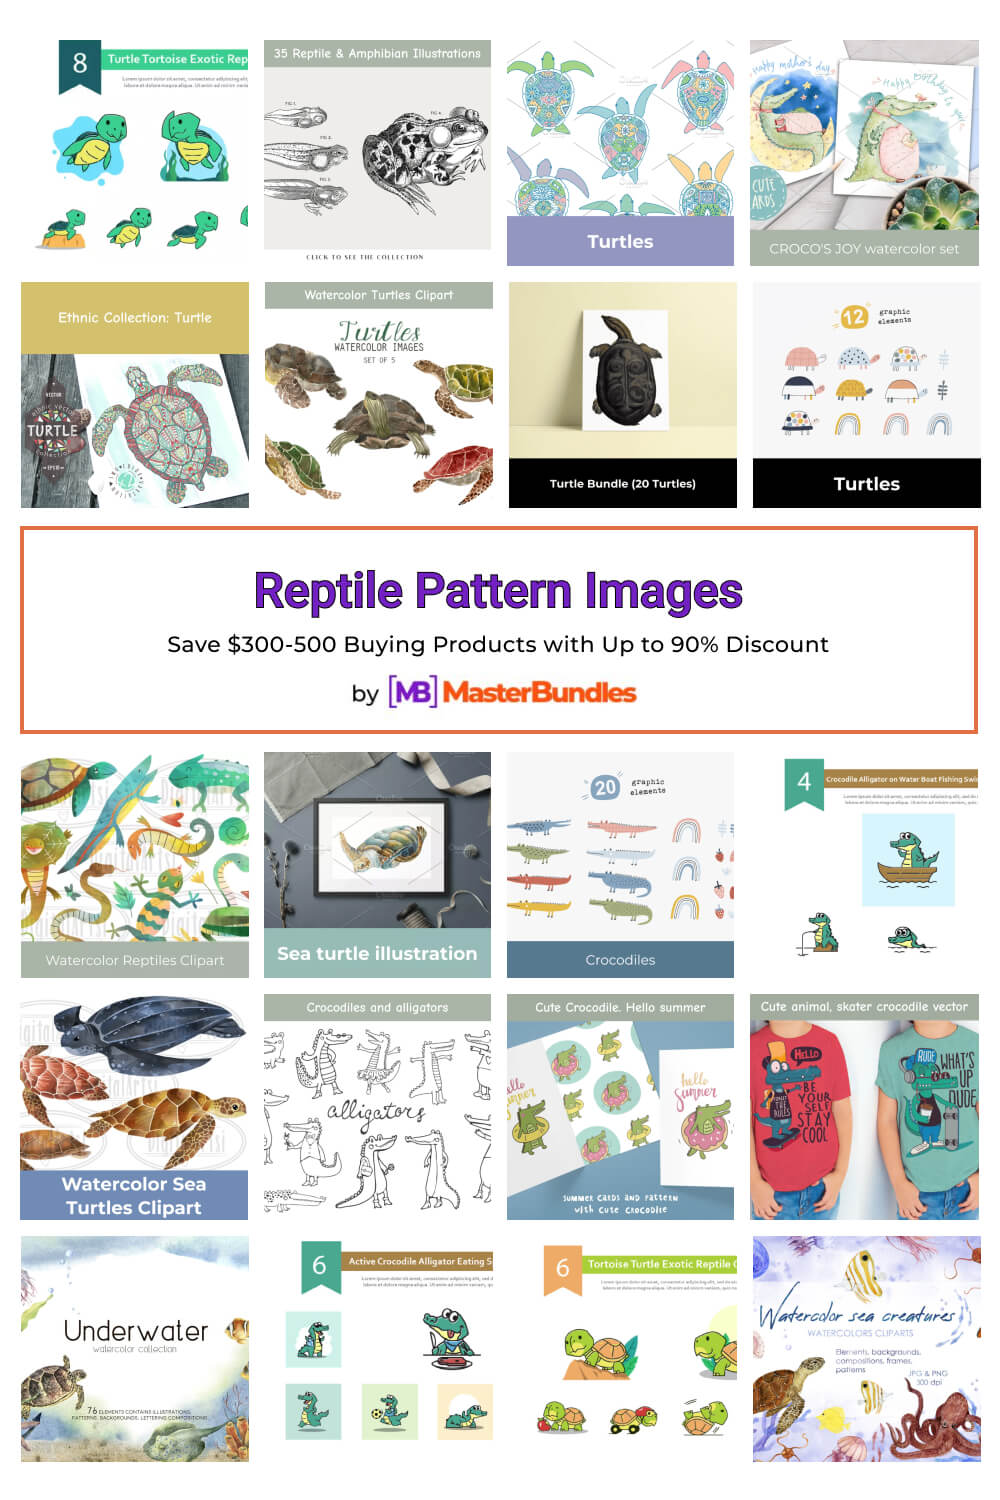 reptile pattern images pinterest image.